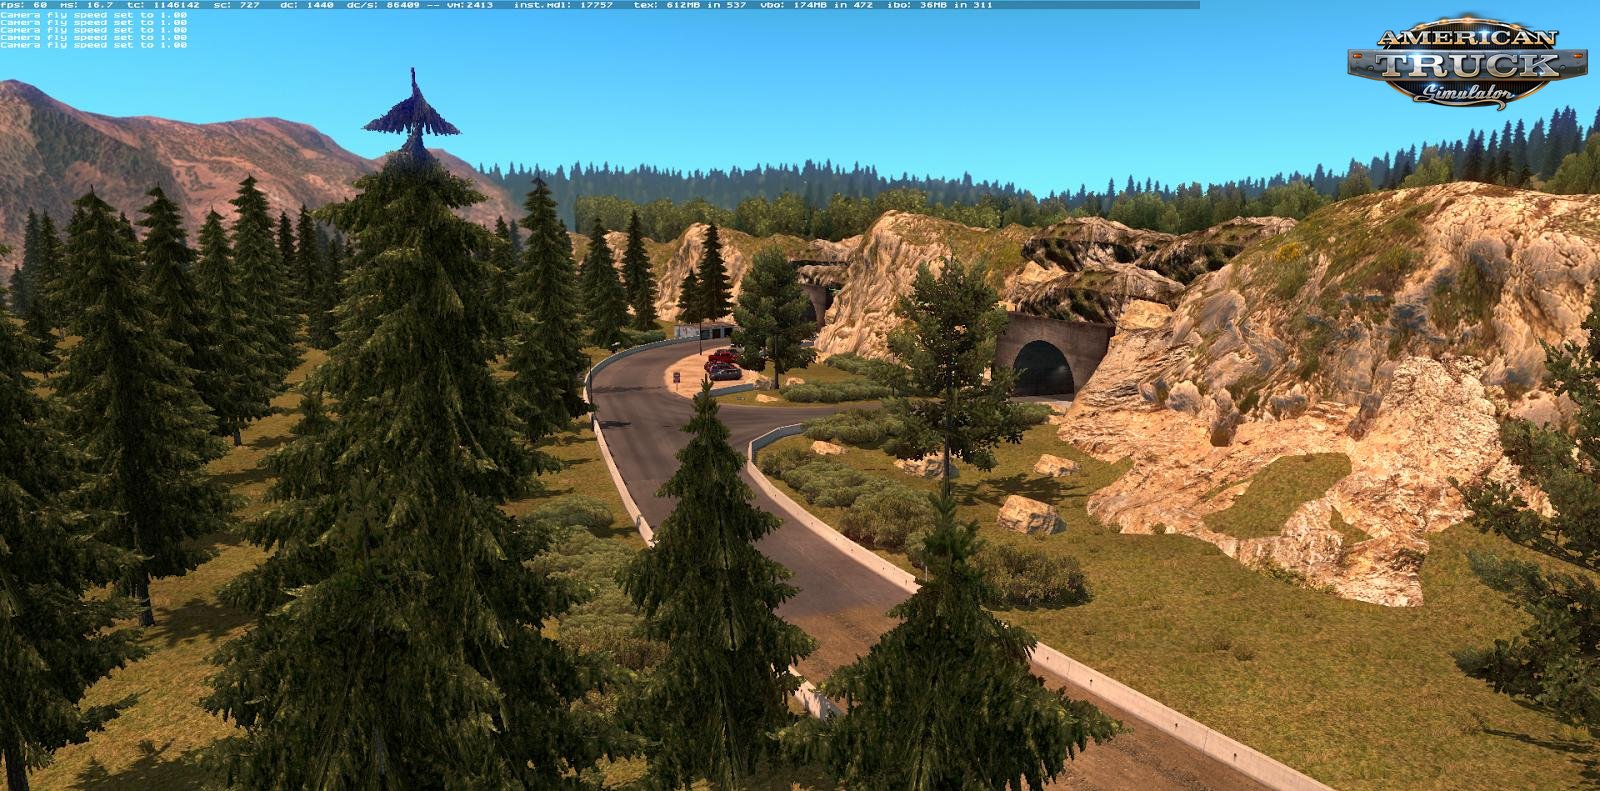 MHAPro Map 1.29. for Ats